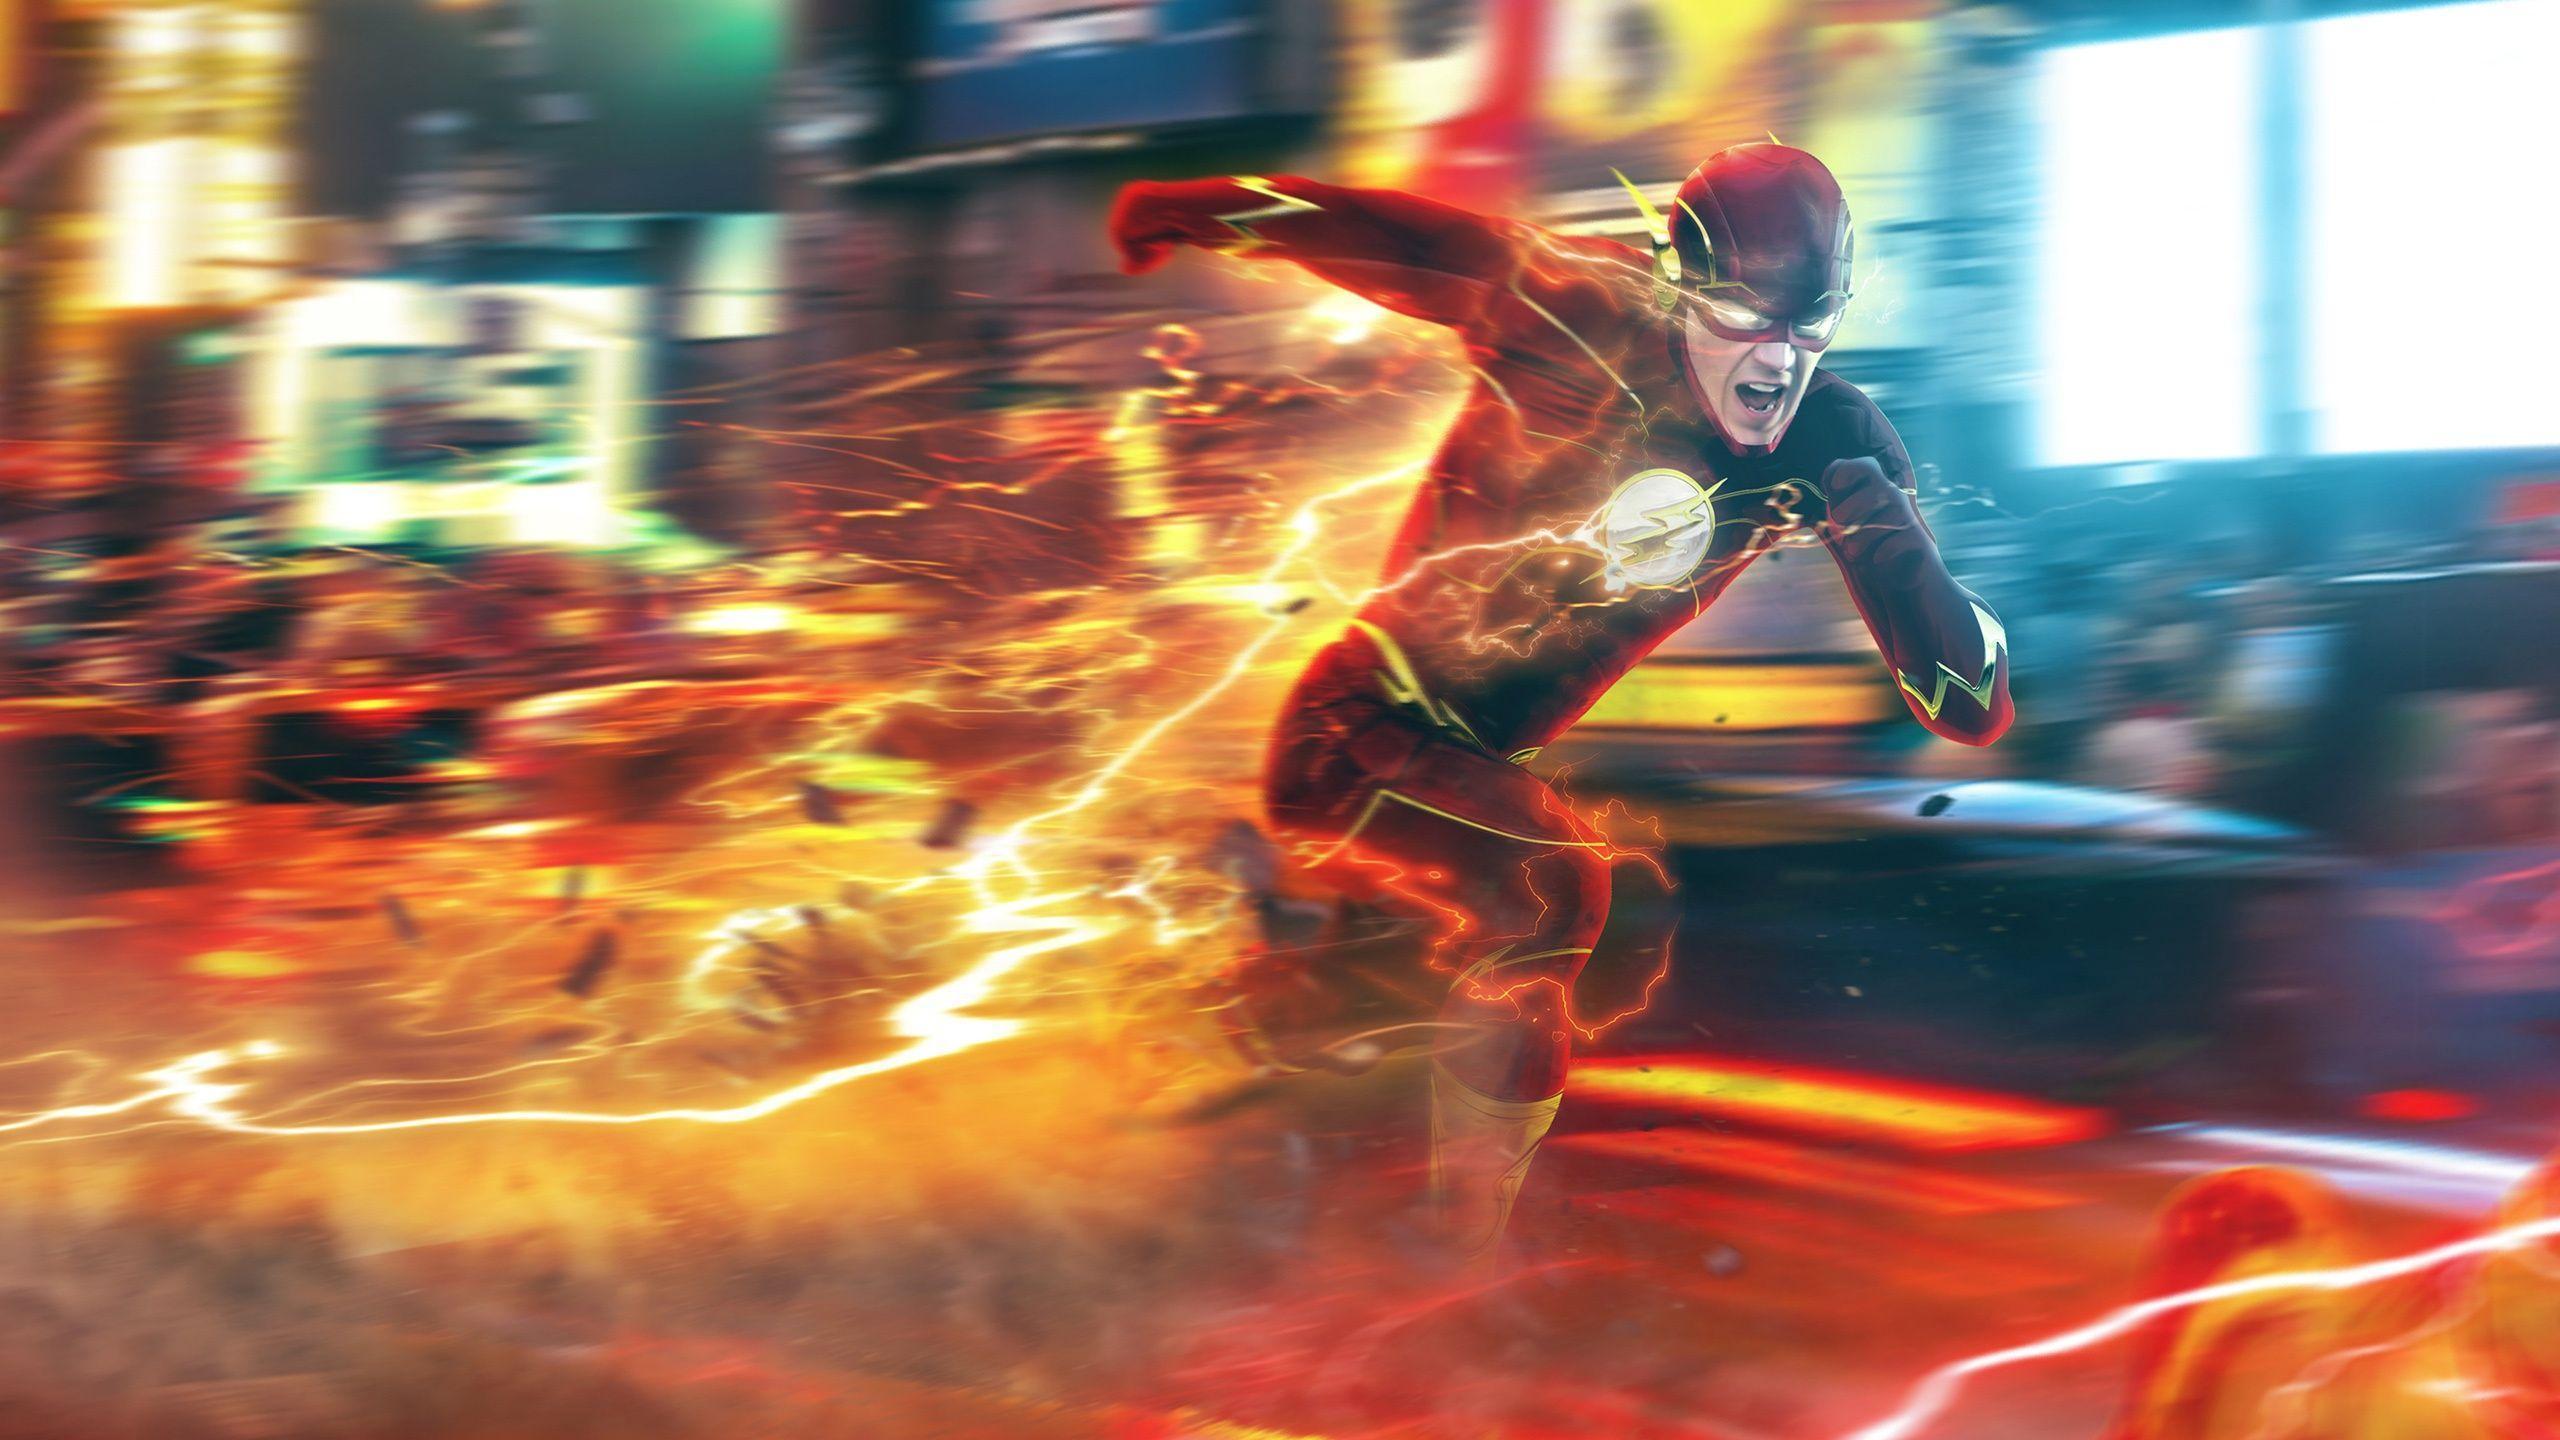 The Flash 4K Wallpaper Free The Flash 4K Background